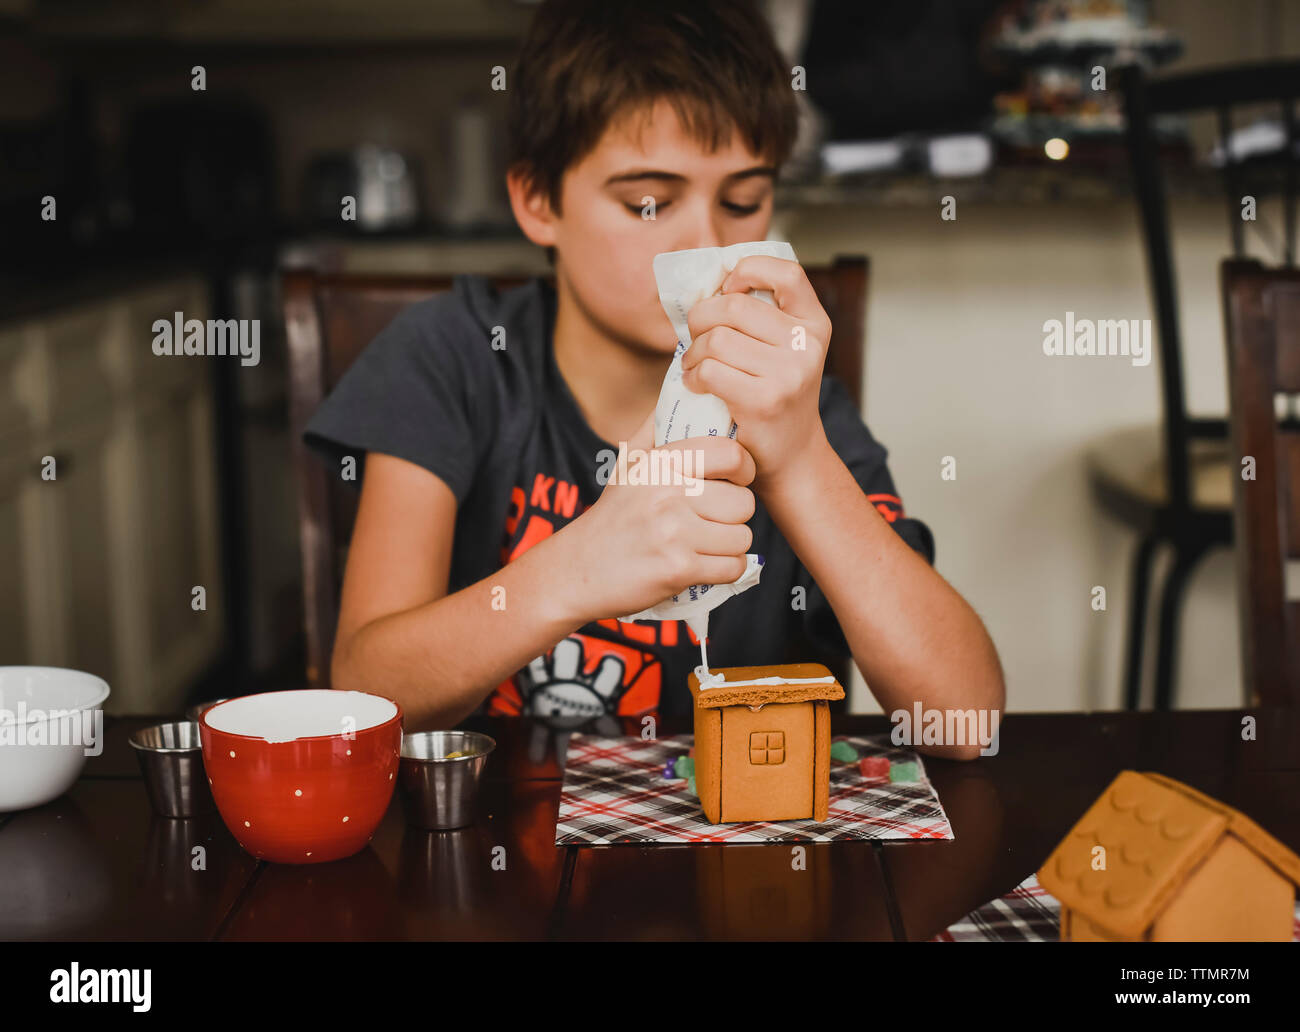 Adolescent boy putting icing on a gingerbread house. Stock Photo